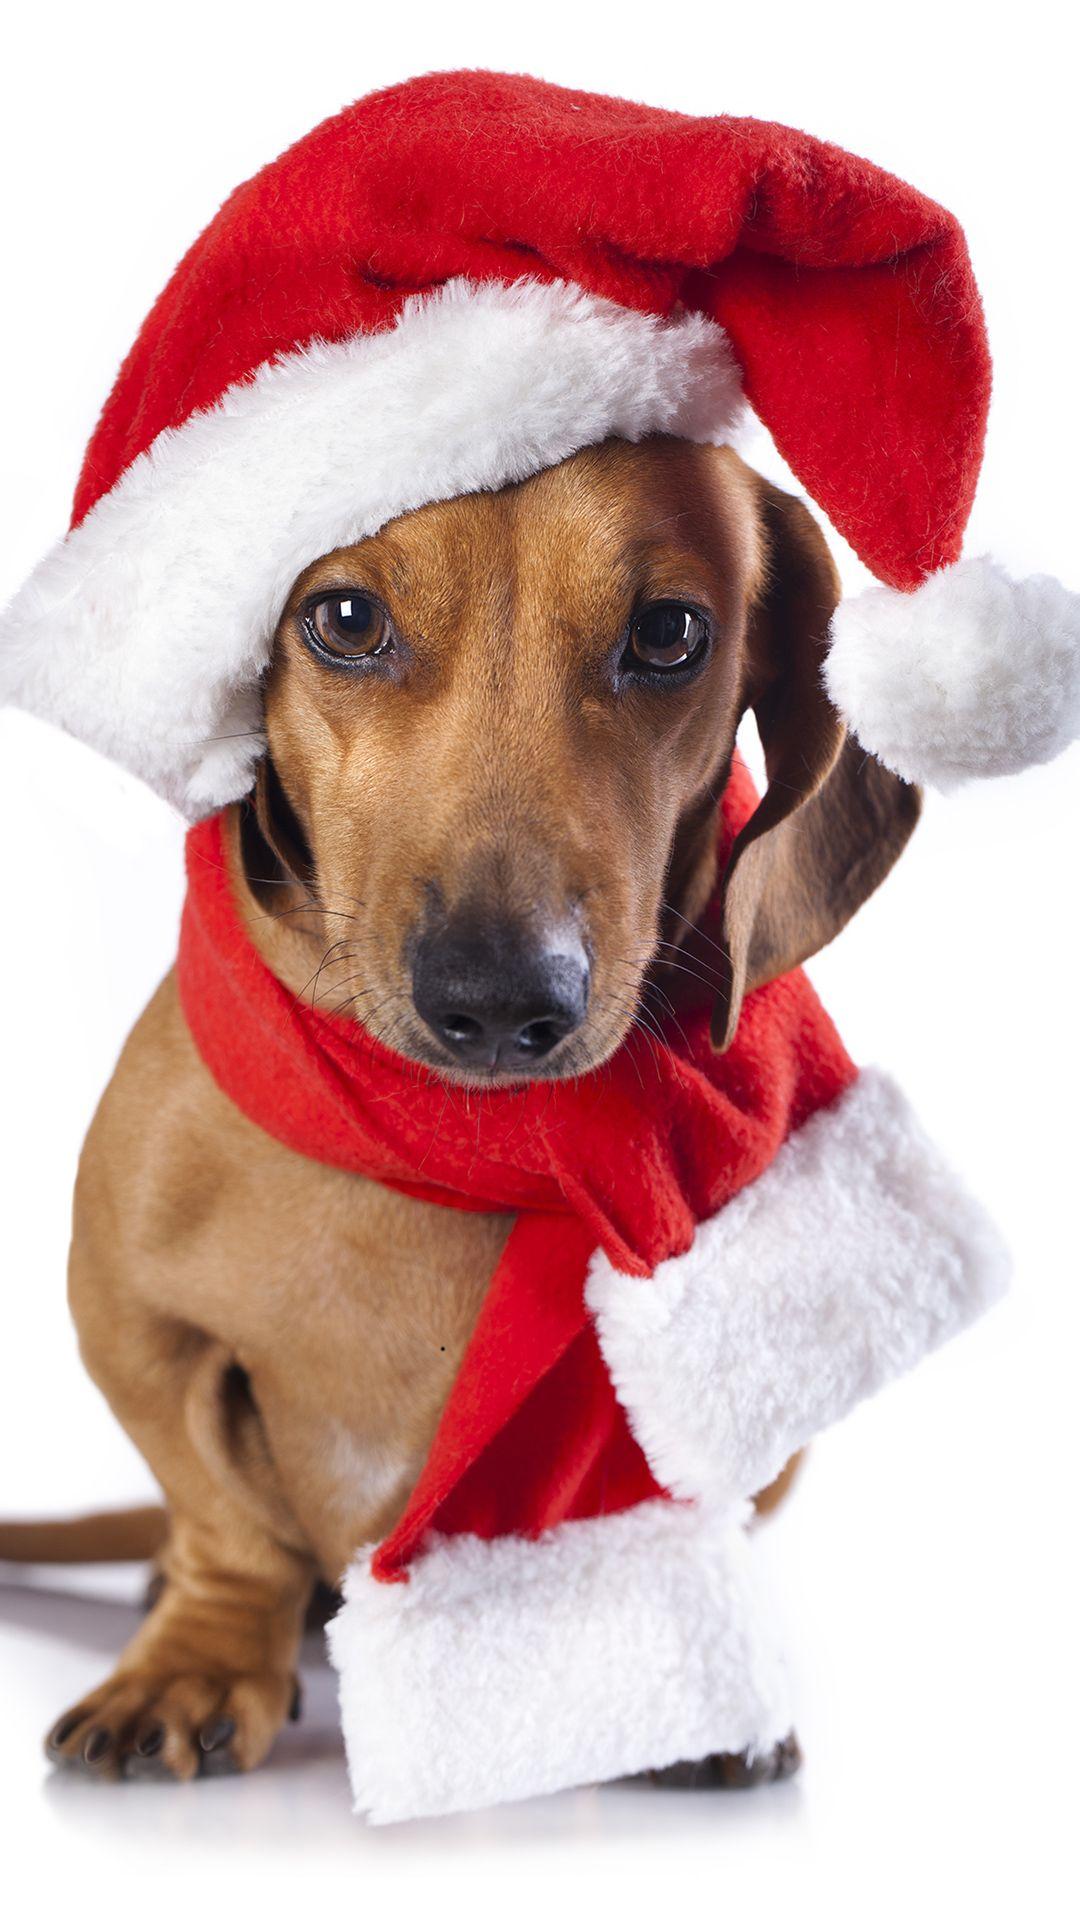 Christmas Dog IPhone 6S Plus Wallpaper Quality Image And Transparent PNG Free Clipart